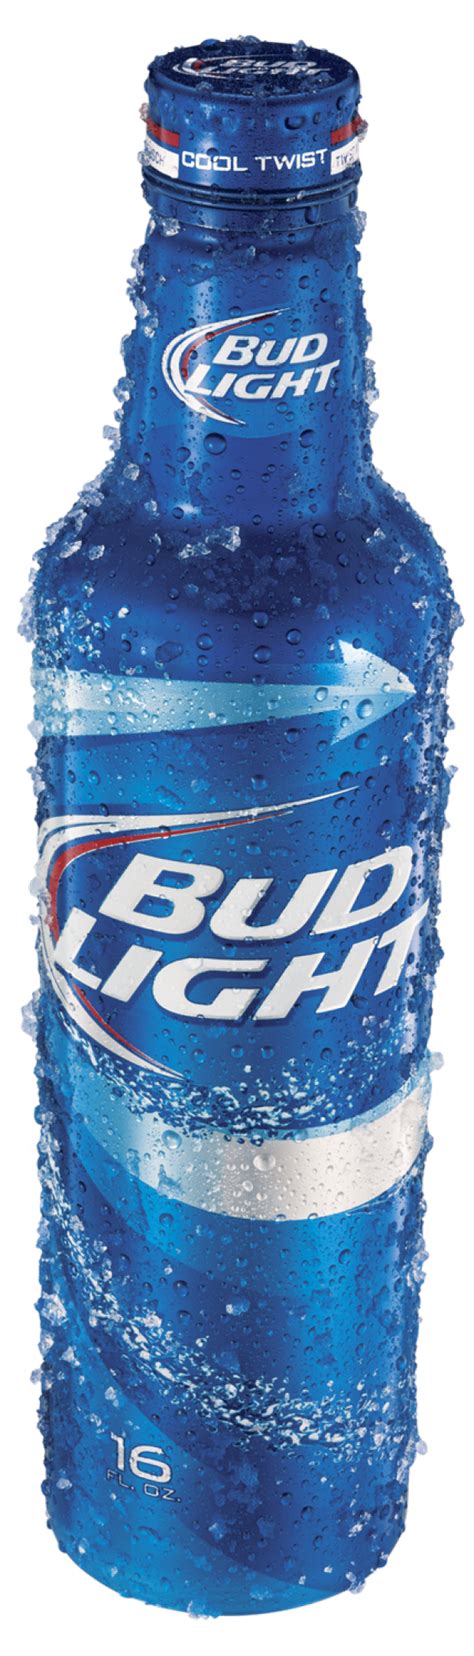 bud light inviting consumers  visit  town usa entertainment